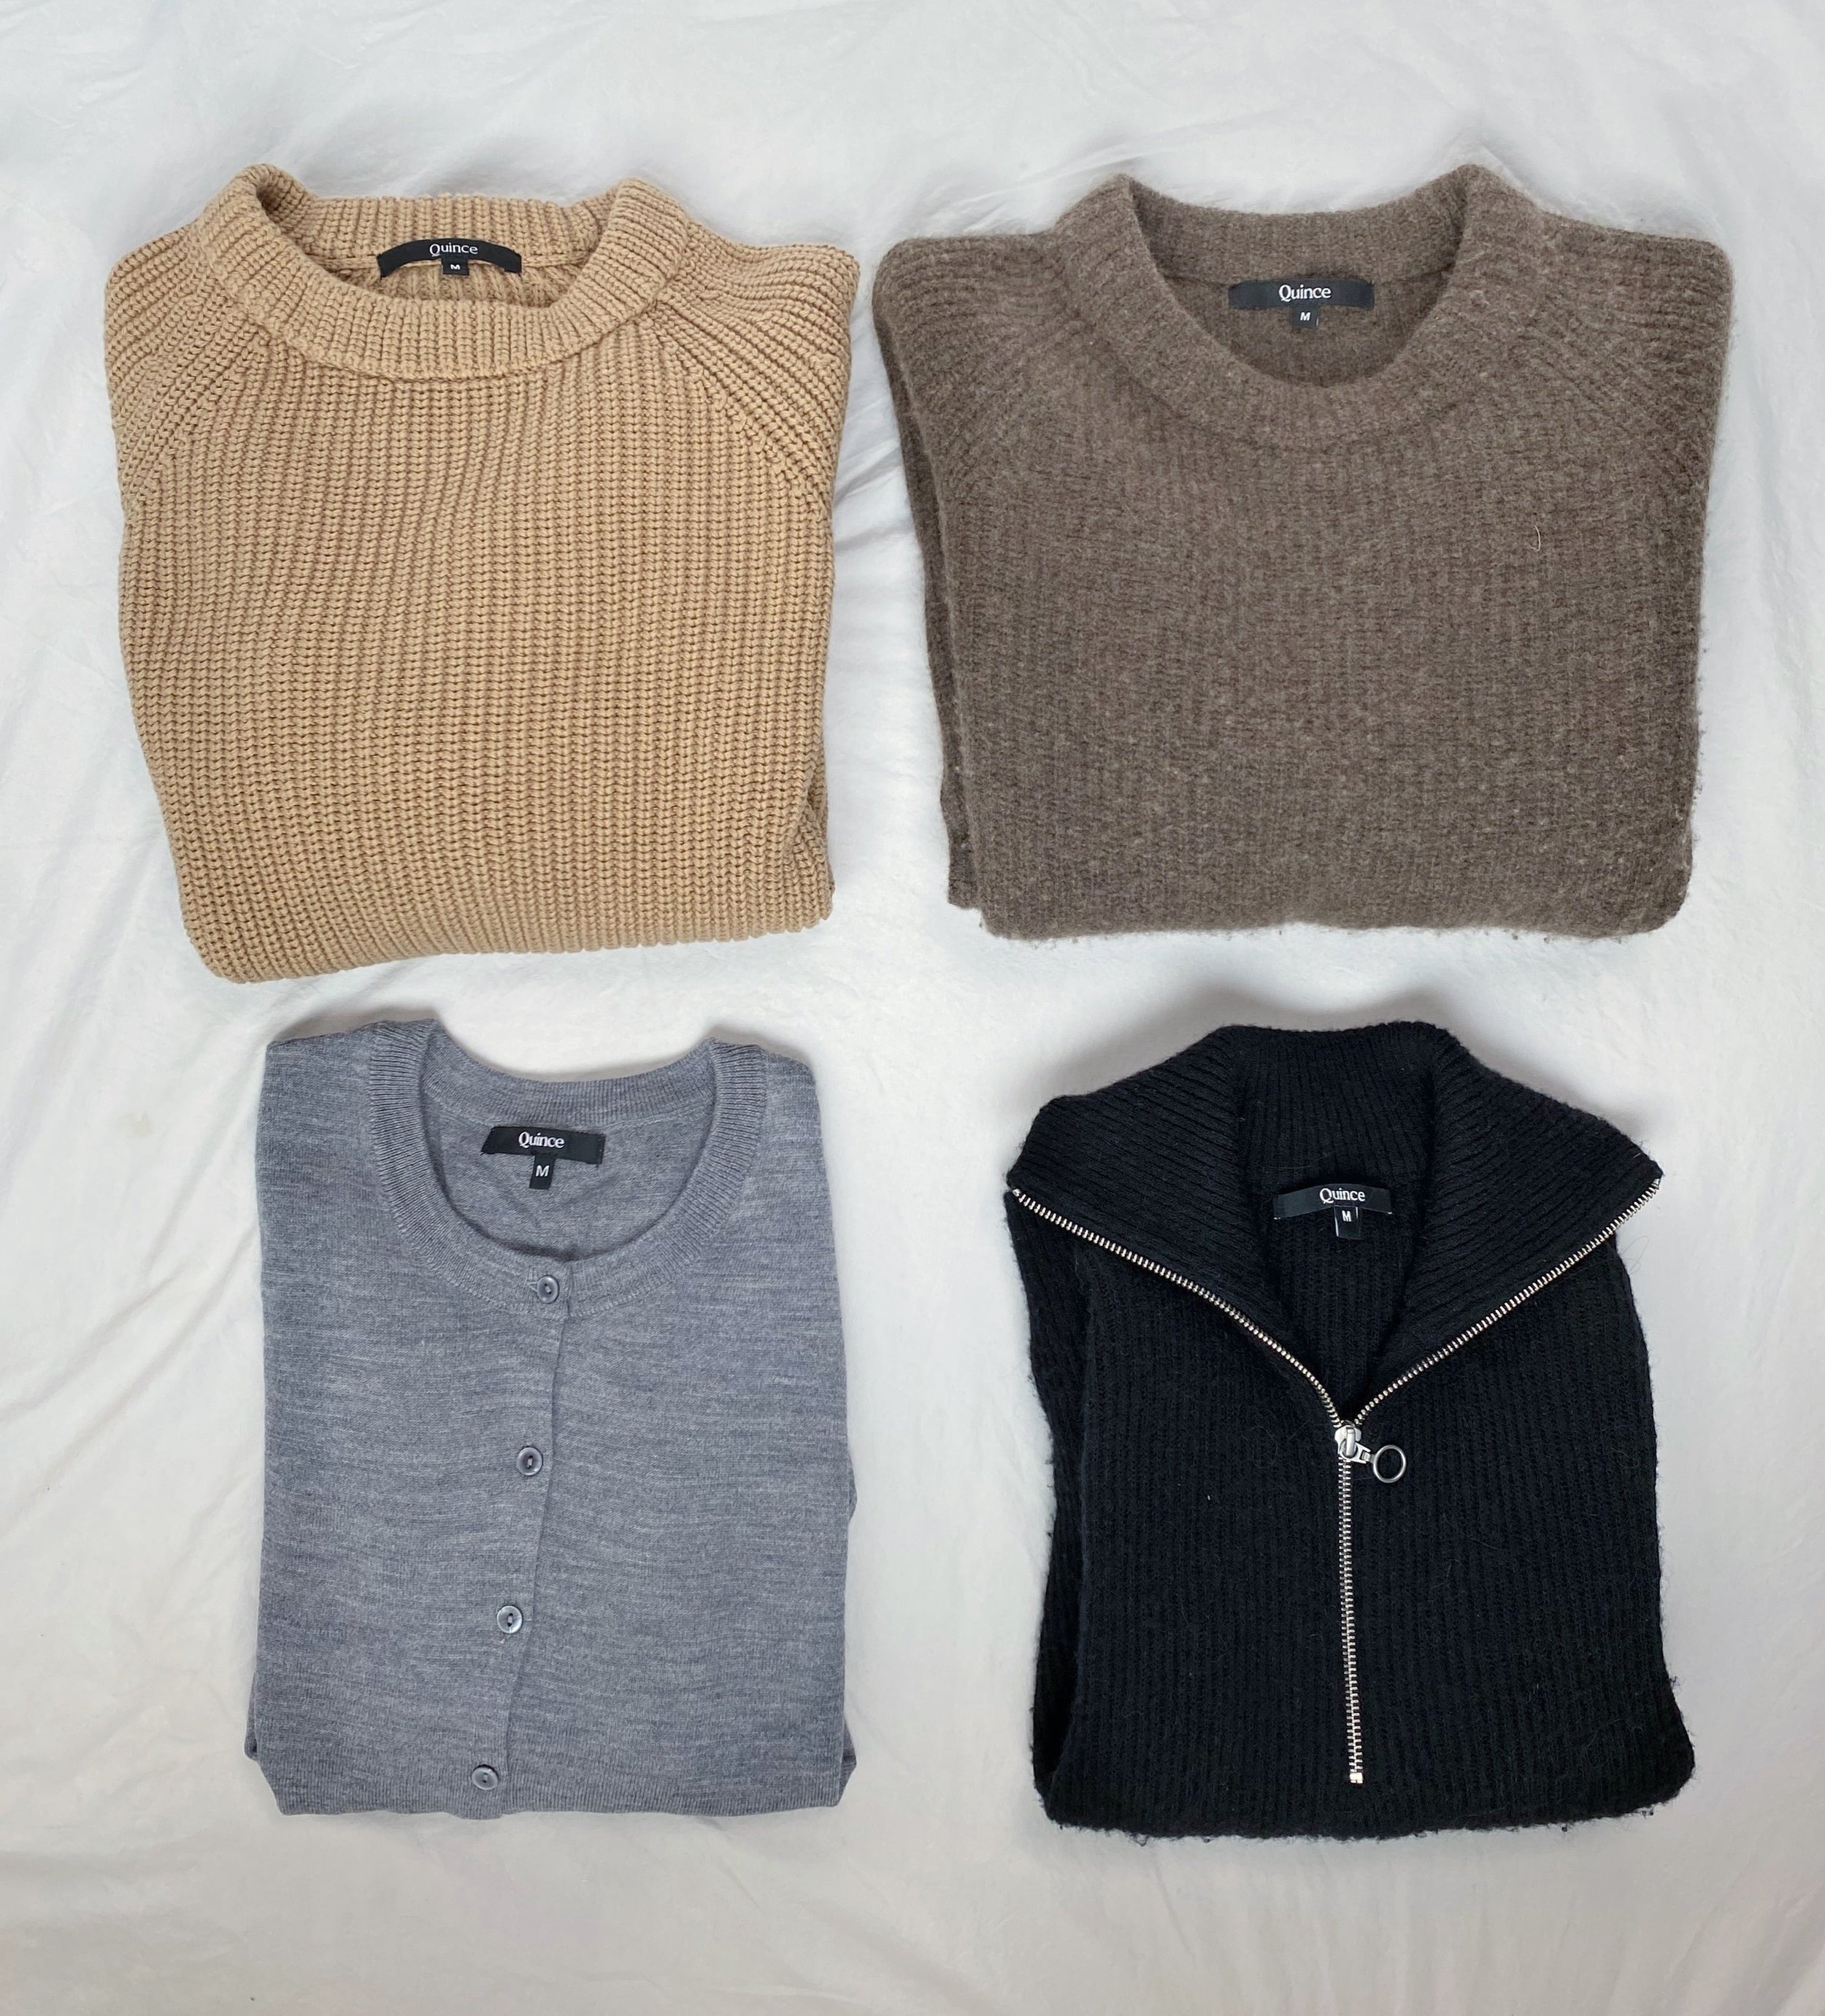 Quince Sweater Review: Cashmere, Cardigan, Alpaca, and Wool